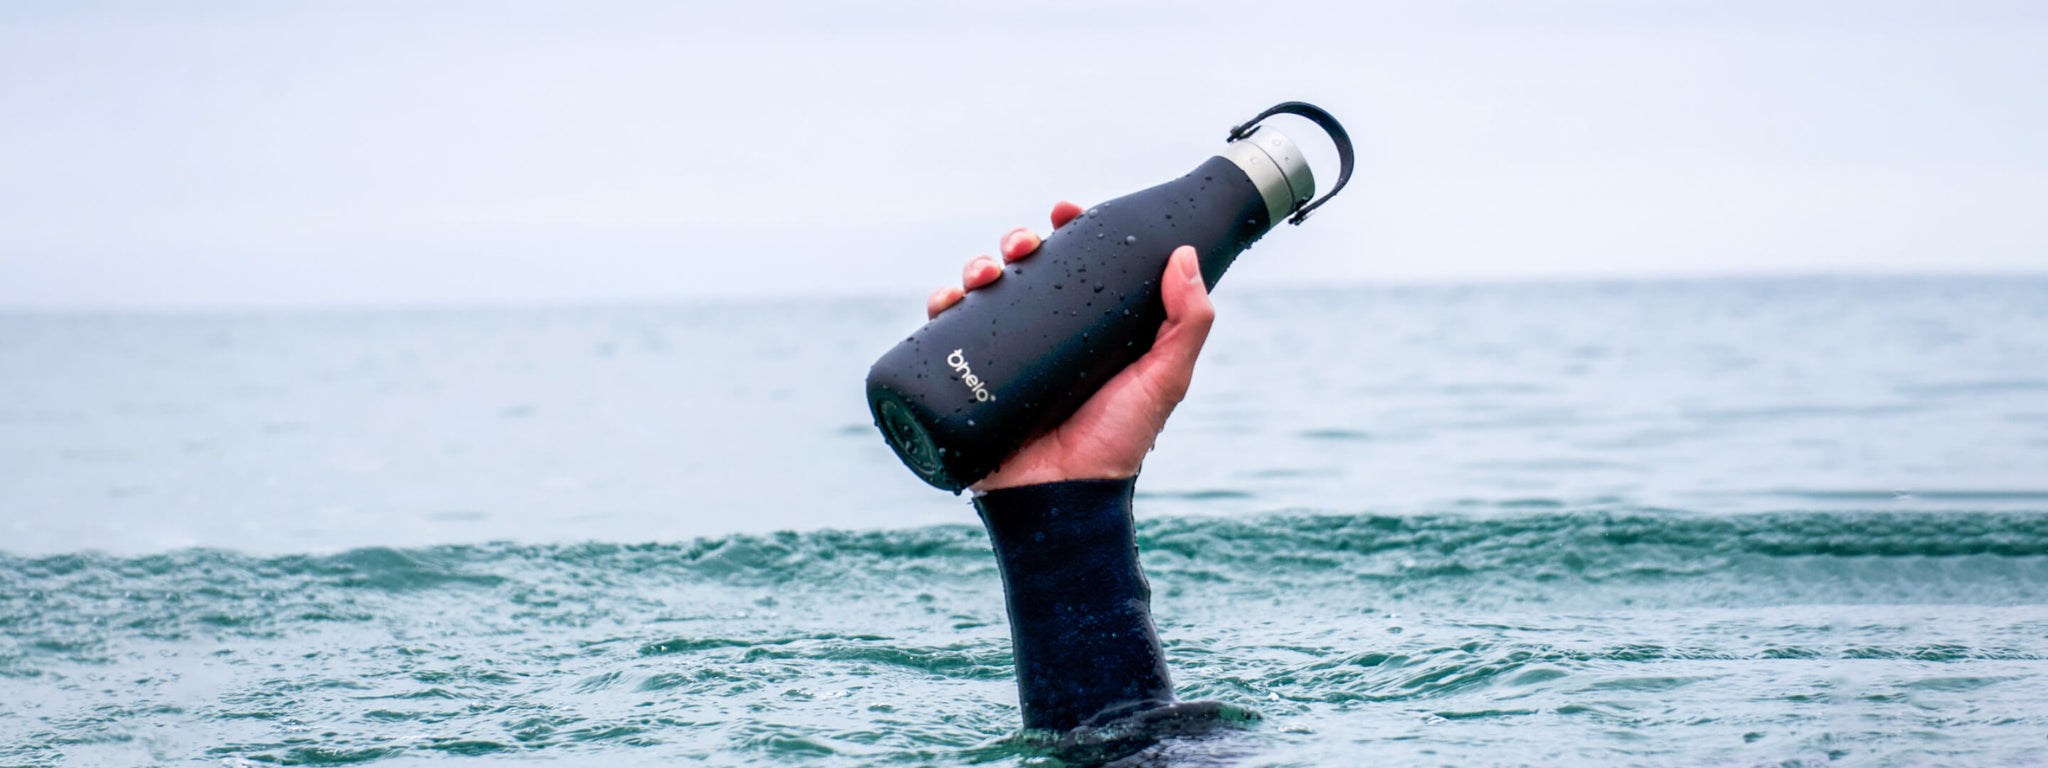 Ohelo insulated water bottle in hand coming out of the ocean